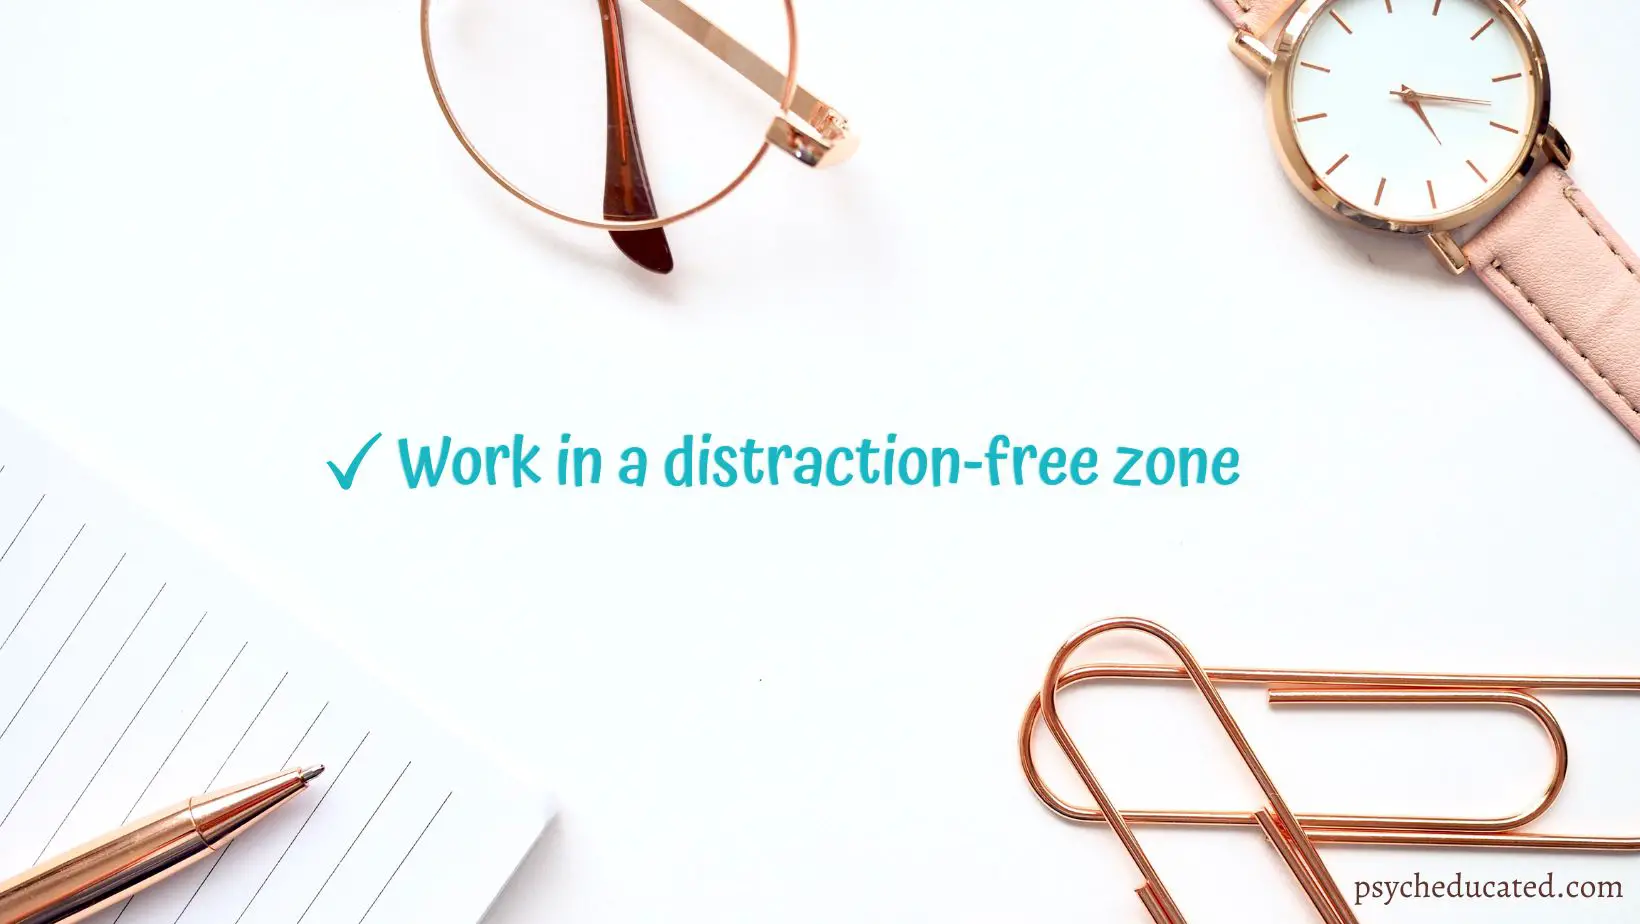 Work in a distraction-free zone 